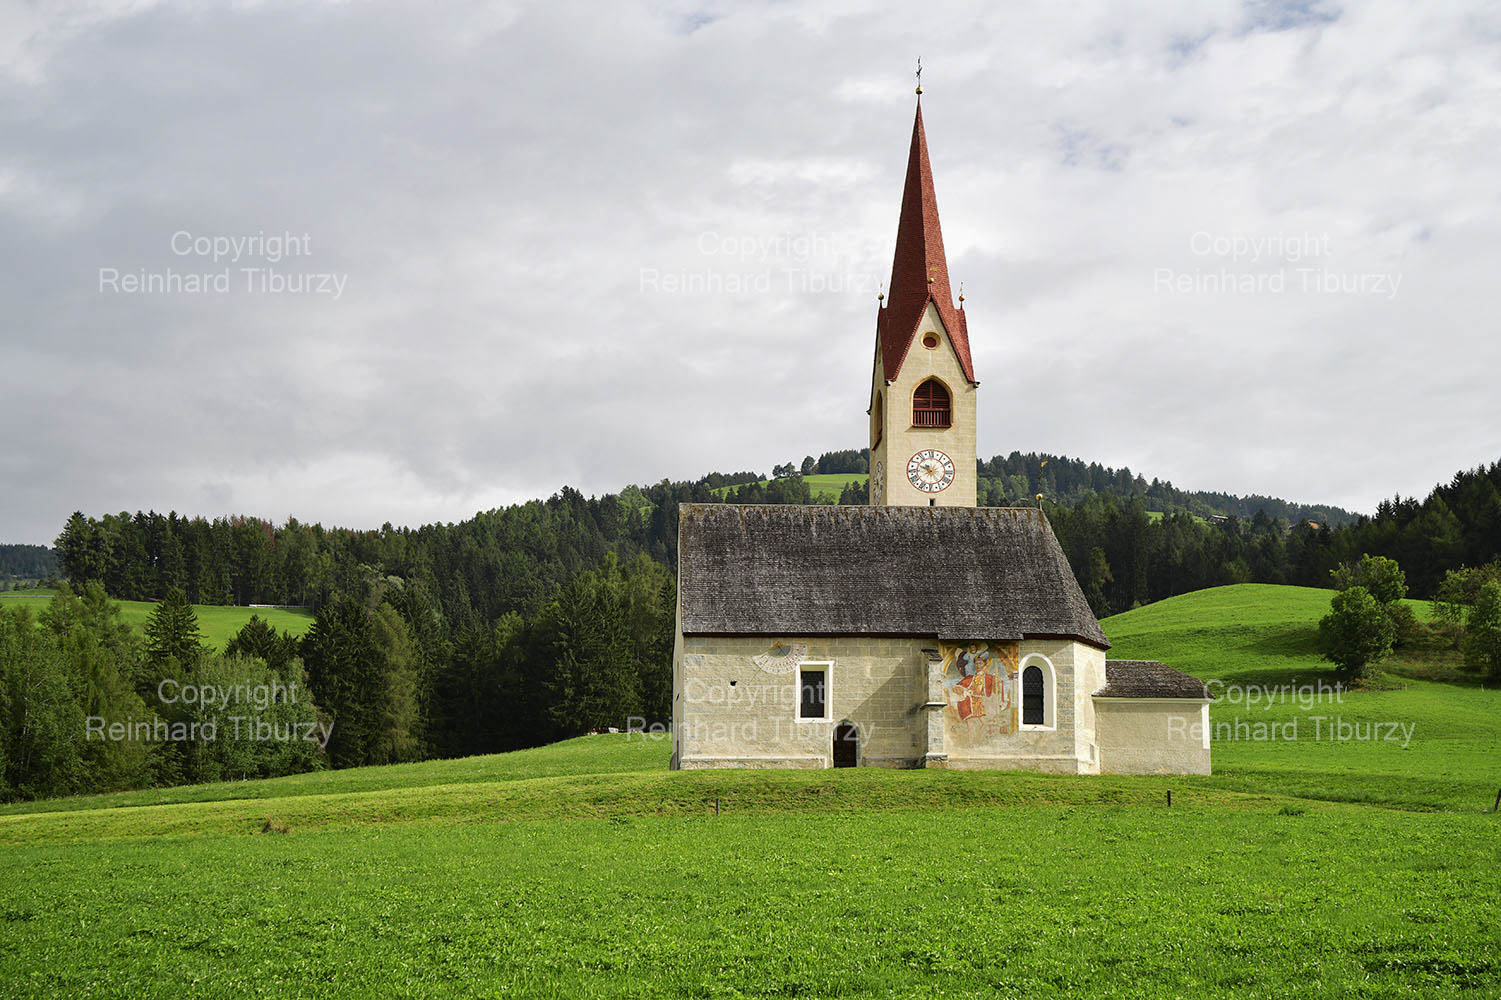 Church of St. Jacob, Nasen, Puster Valley, South Tyrol, Italy